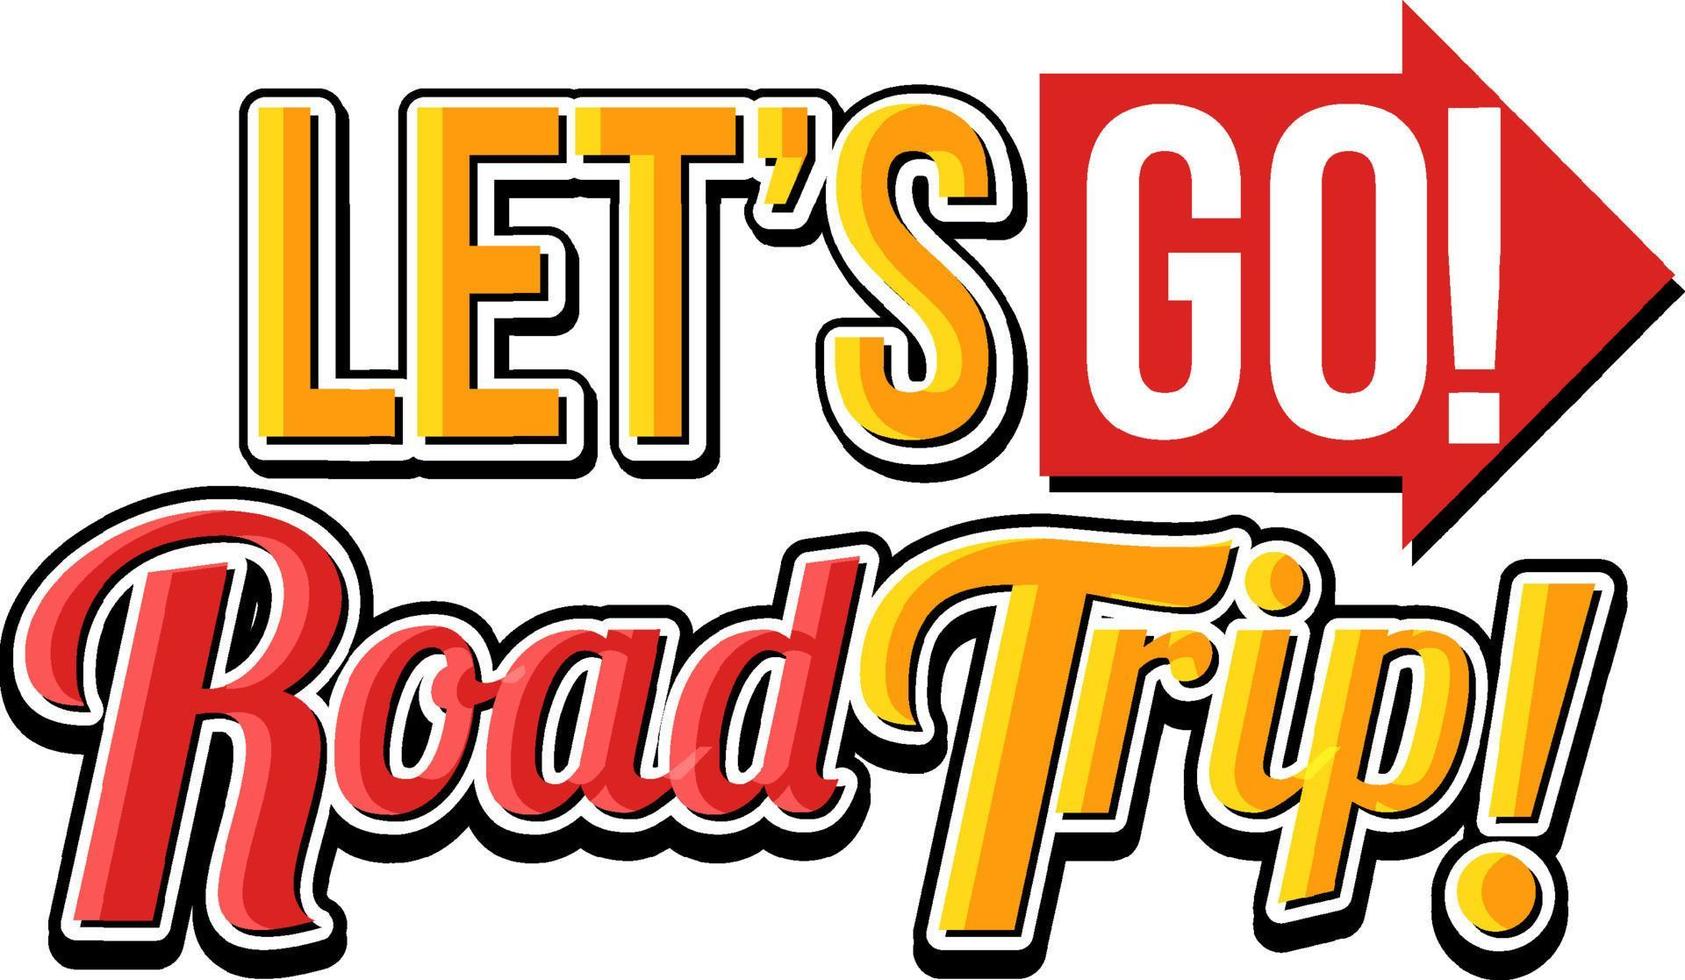 Lets go road trip icon on white background vector